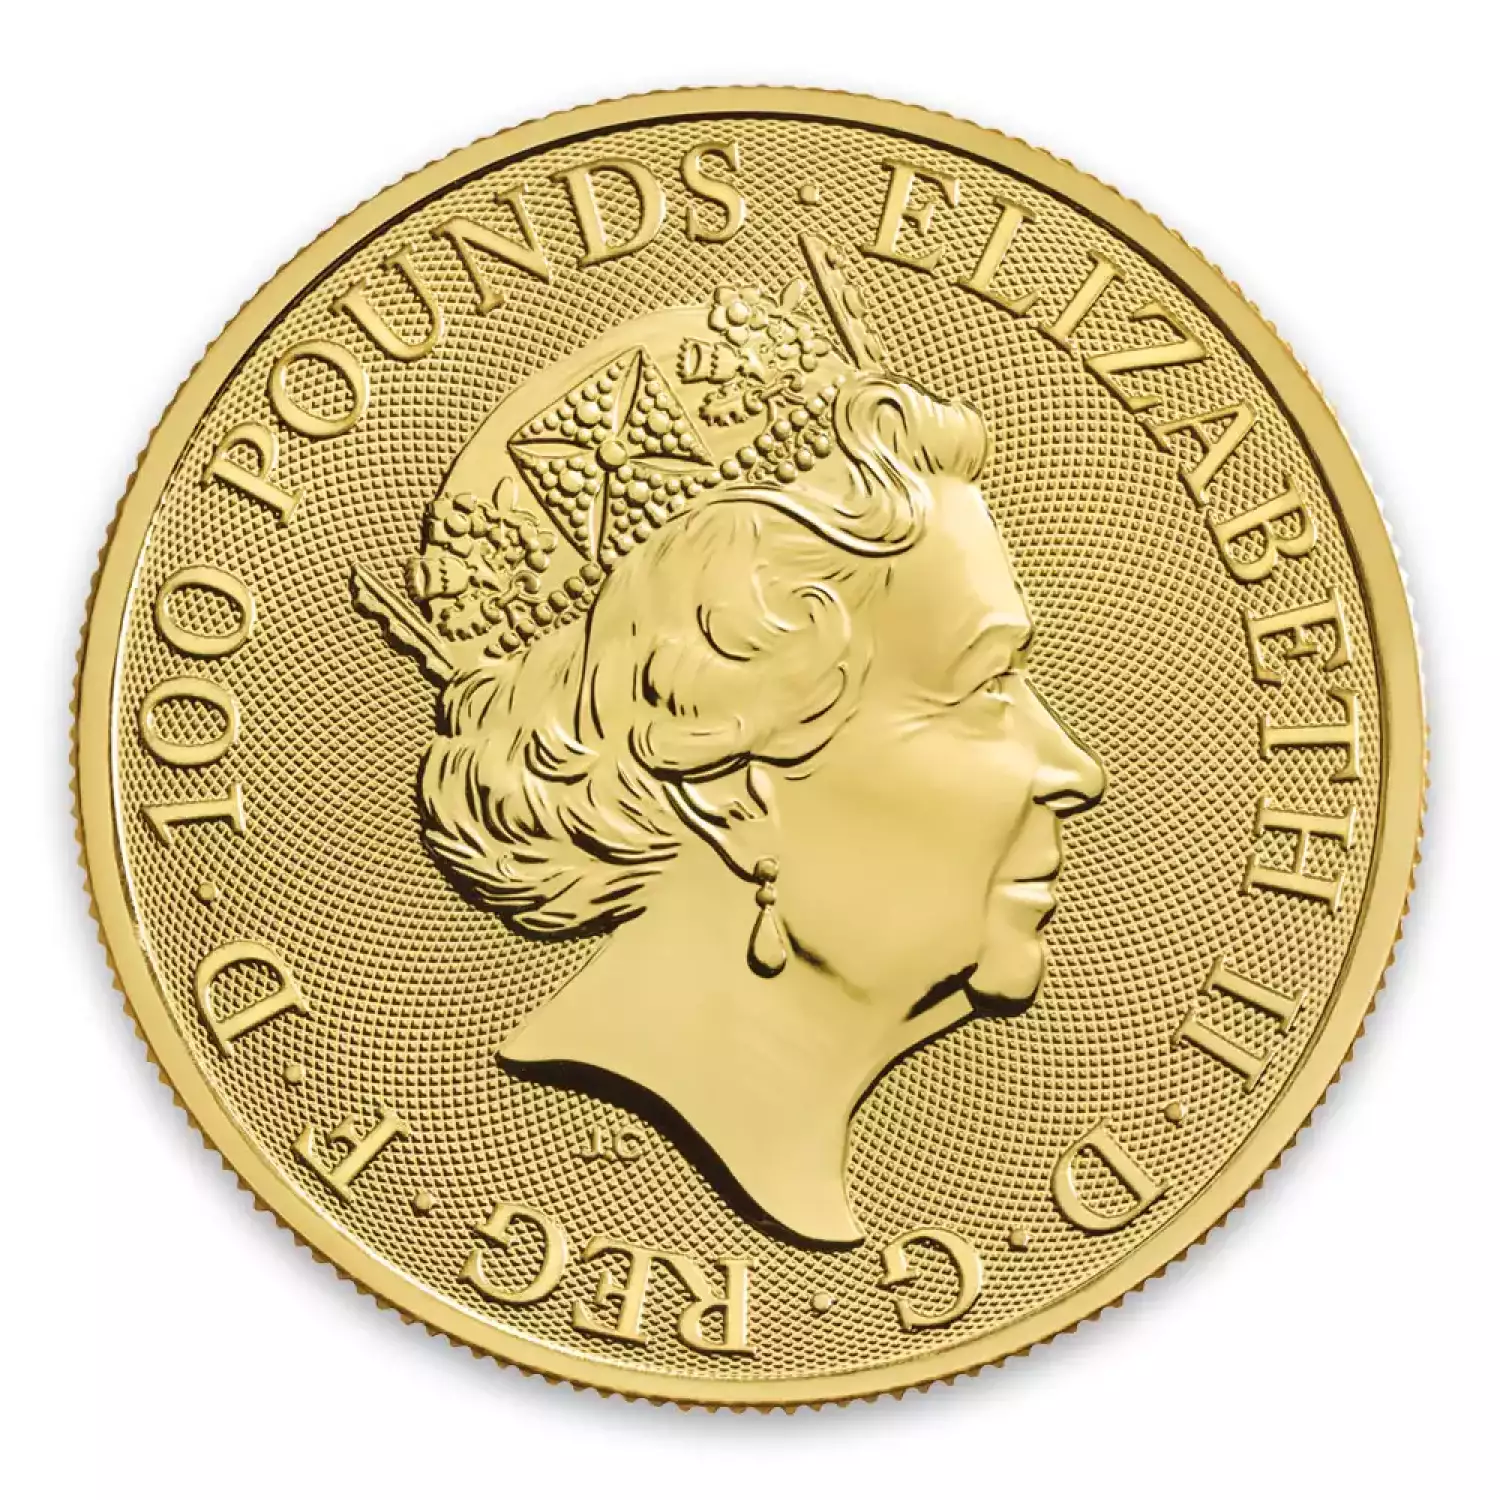 2020 1oz Gold Britain Queen's Beast: The White Horse (3)